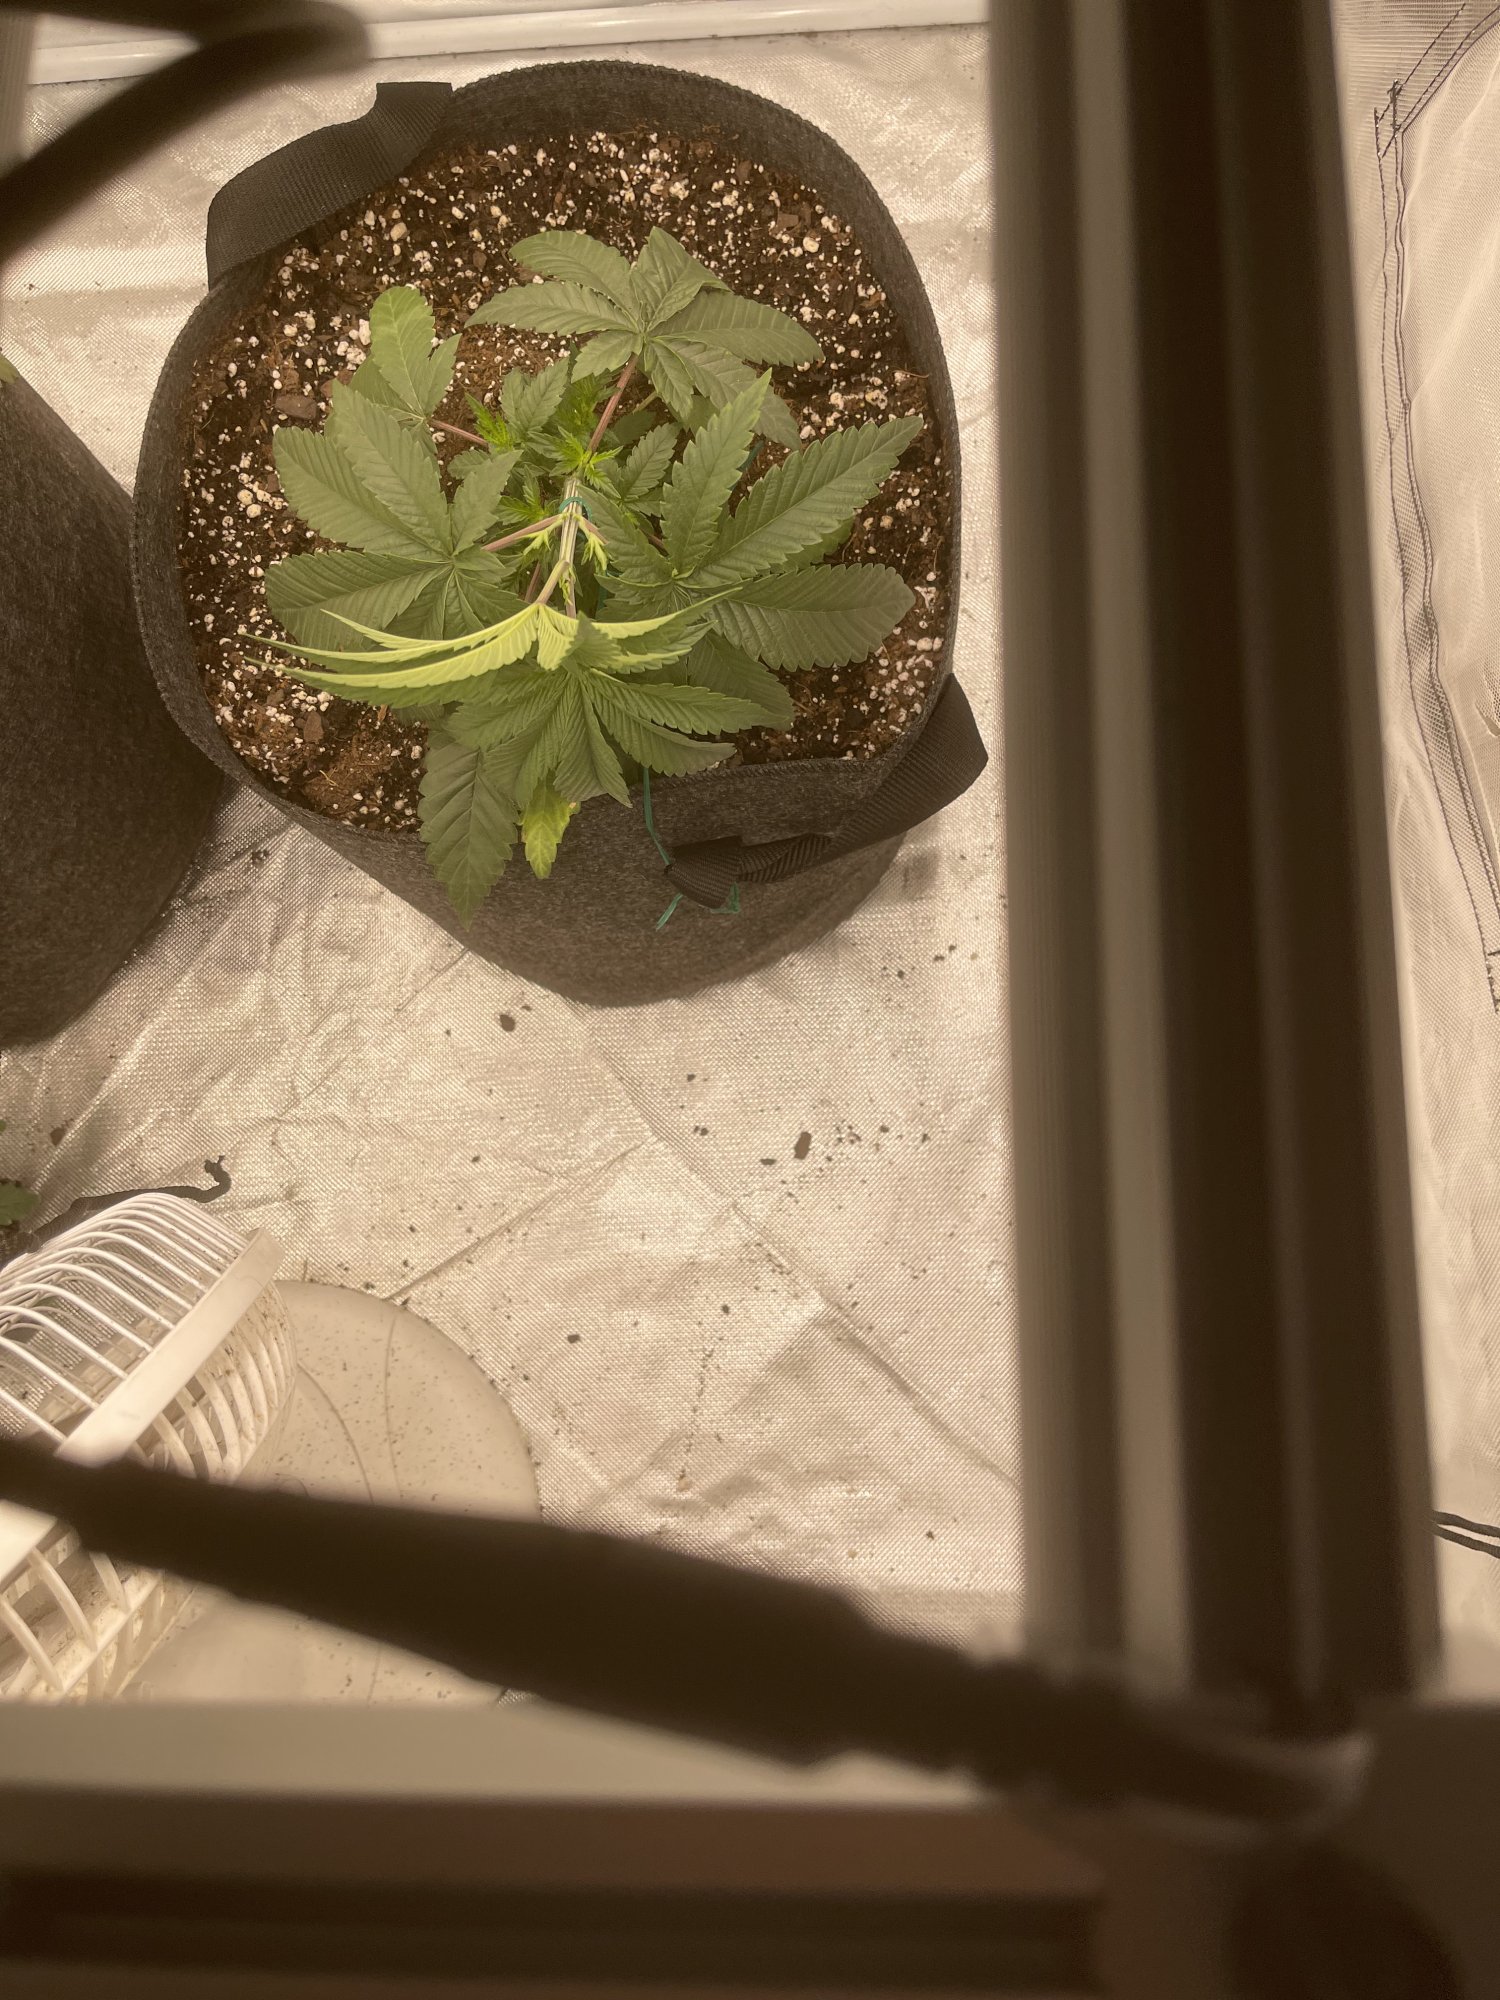 Lst training mistake on 3 week old plant